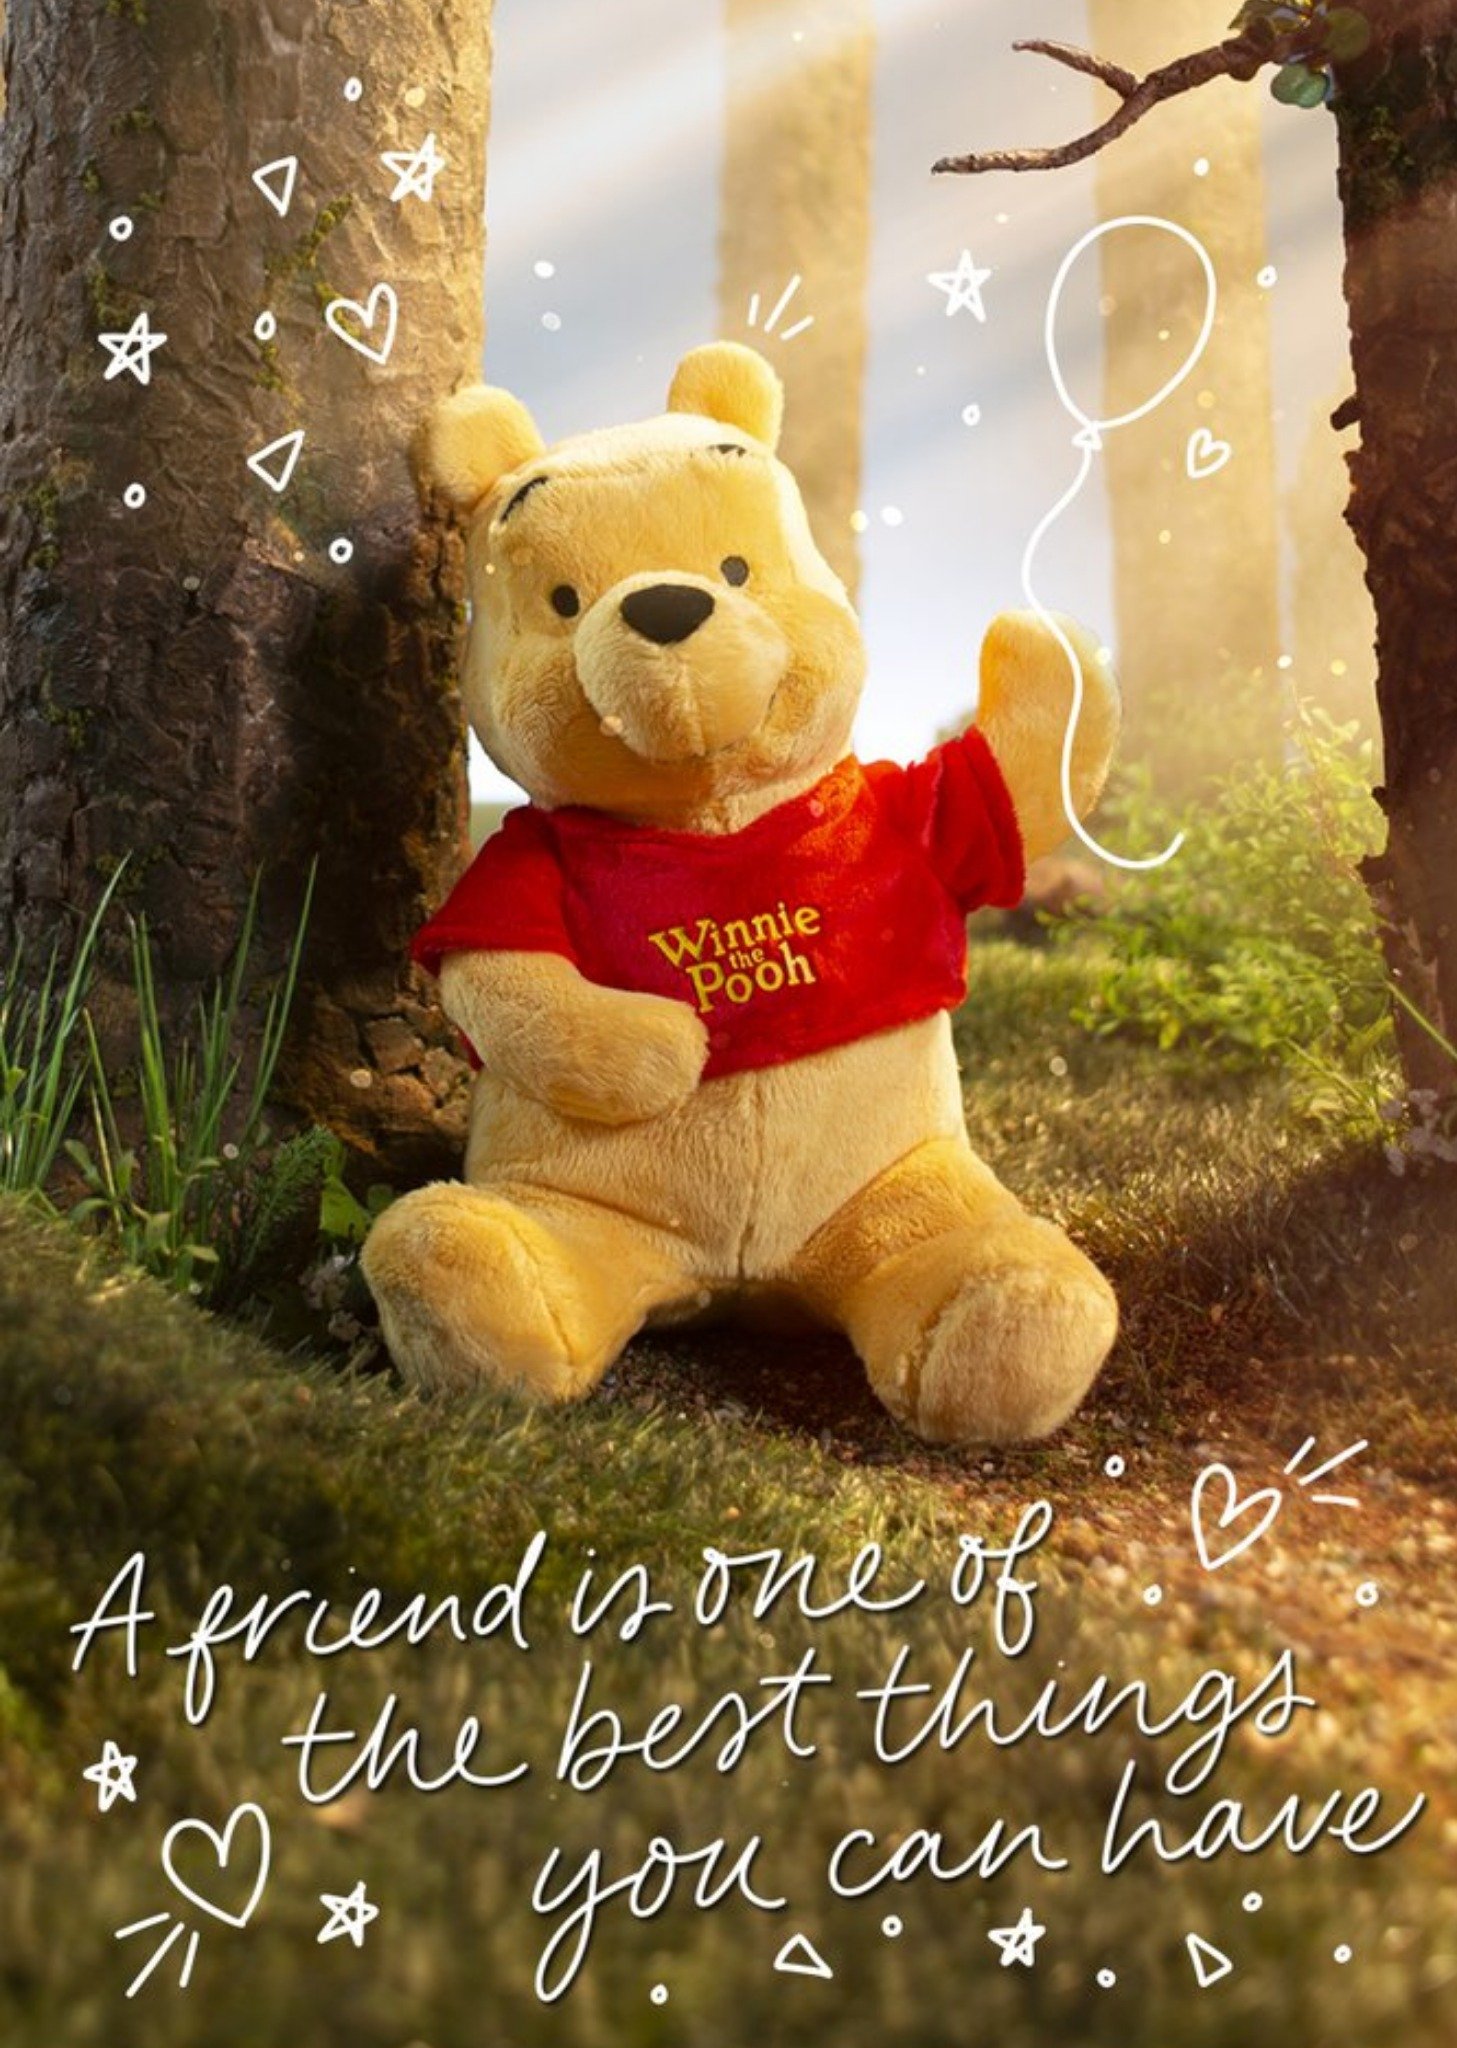 Cute Disney Plush Winne The Pooh Best Thing You Can Have Card Ecard